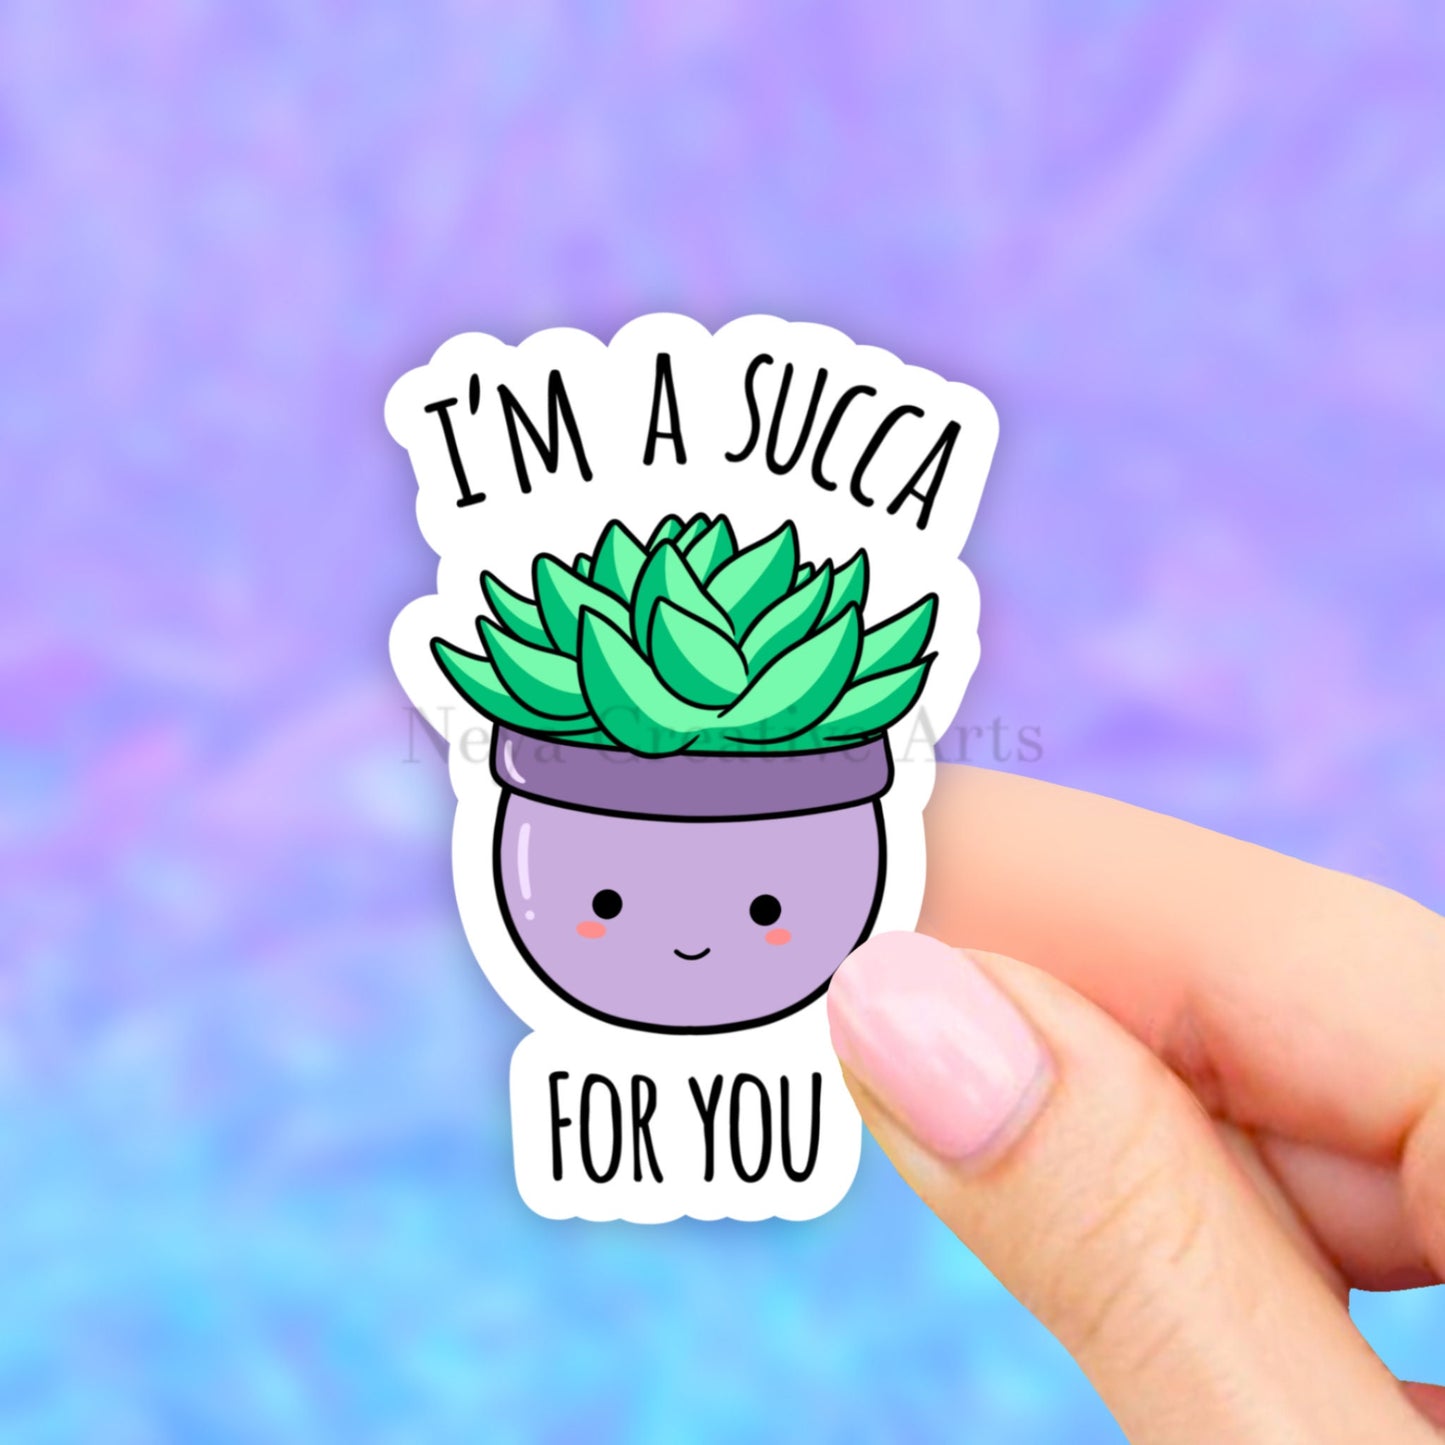 I'm A Succa For you Sticker, succ it sticker, succulent stickers, plant life stickers, laptop stickers, tumbler decals, water bottle sticker